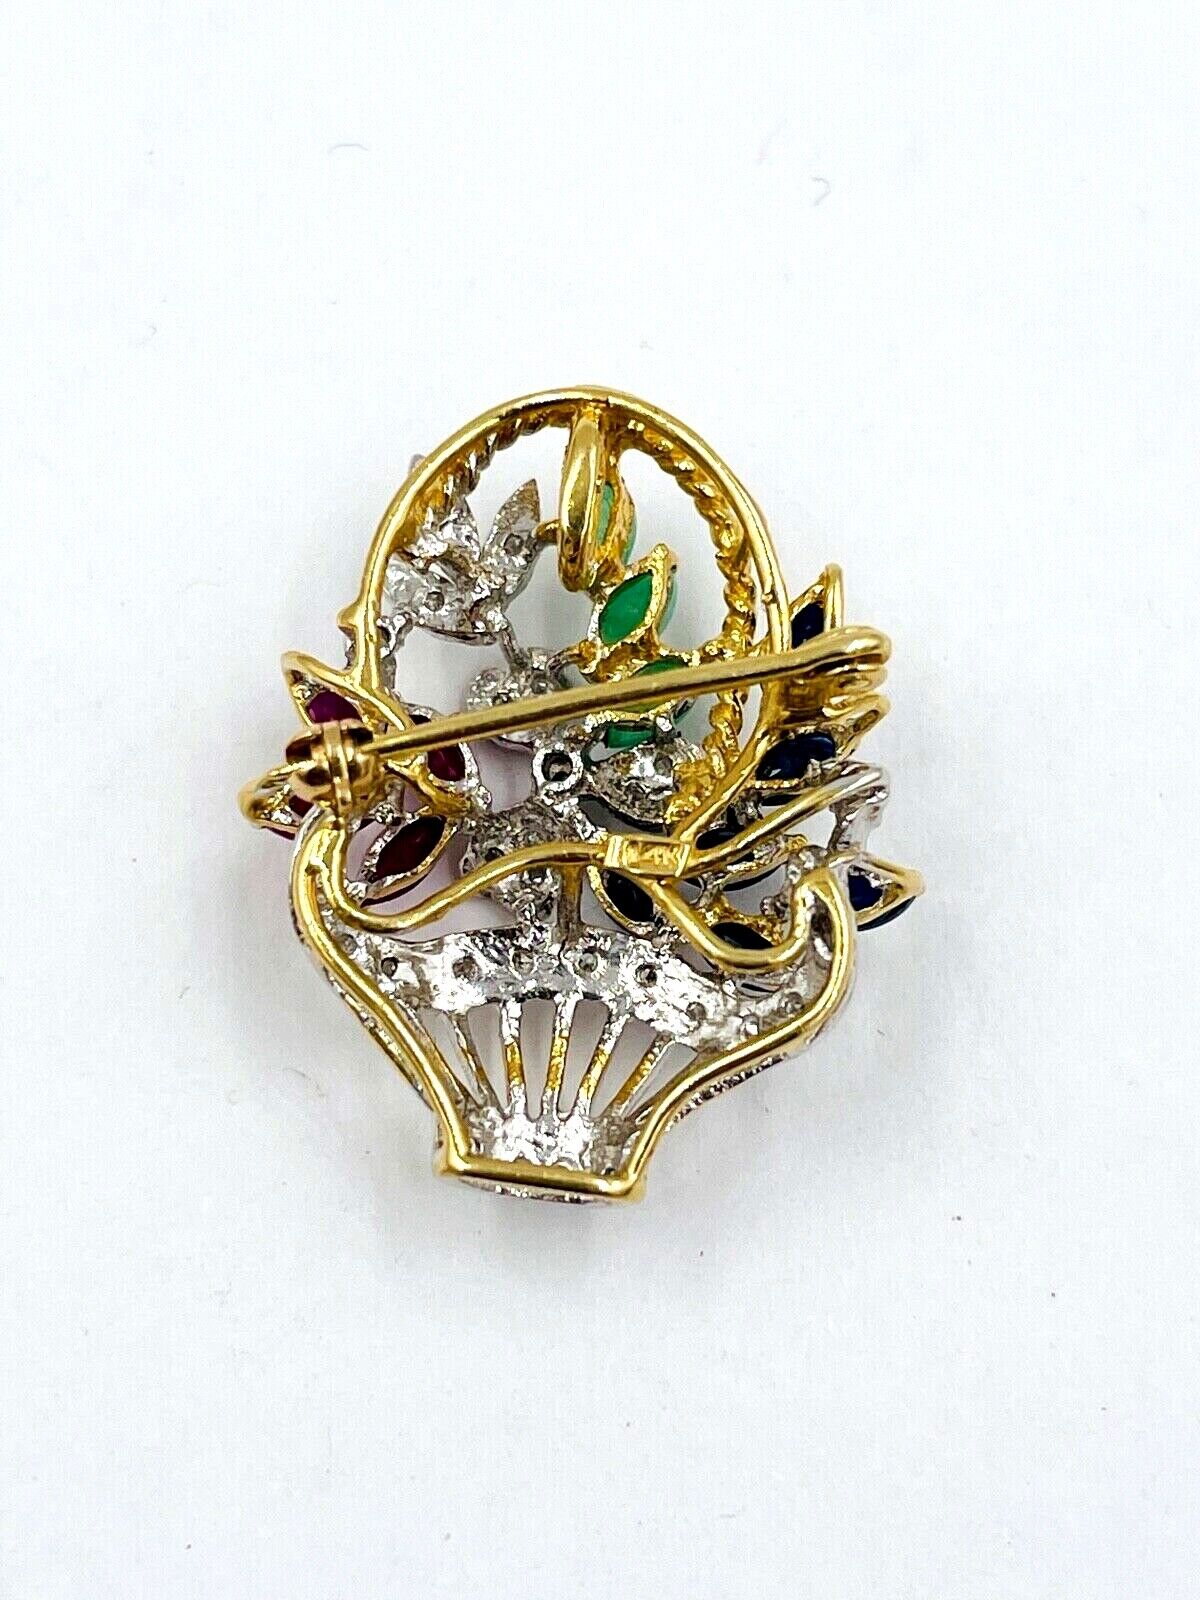 14K Yellow Gold Basket with Emerald, Sapphire and Diamond Brooch Pendant combo